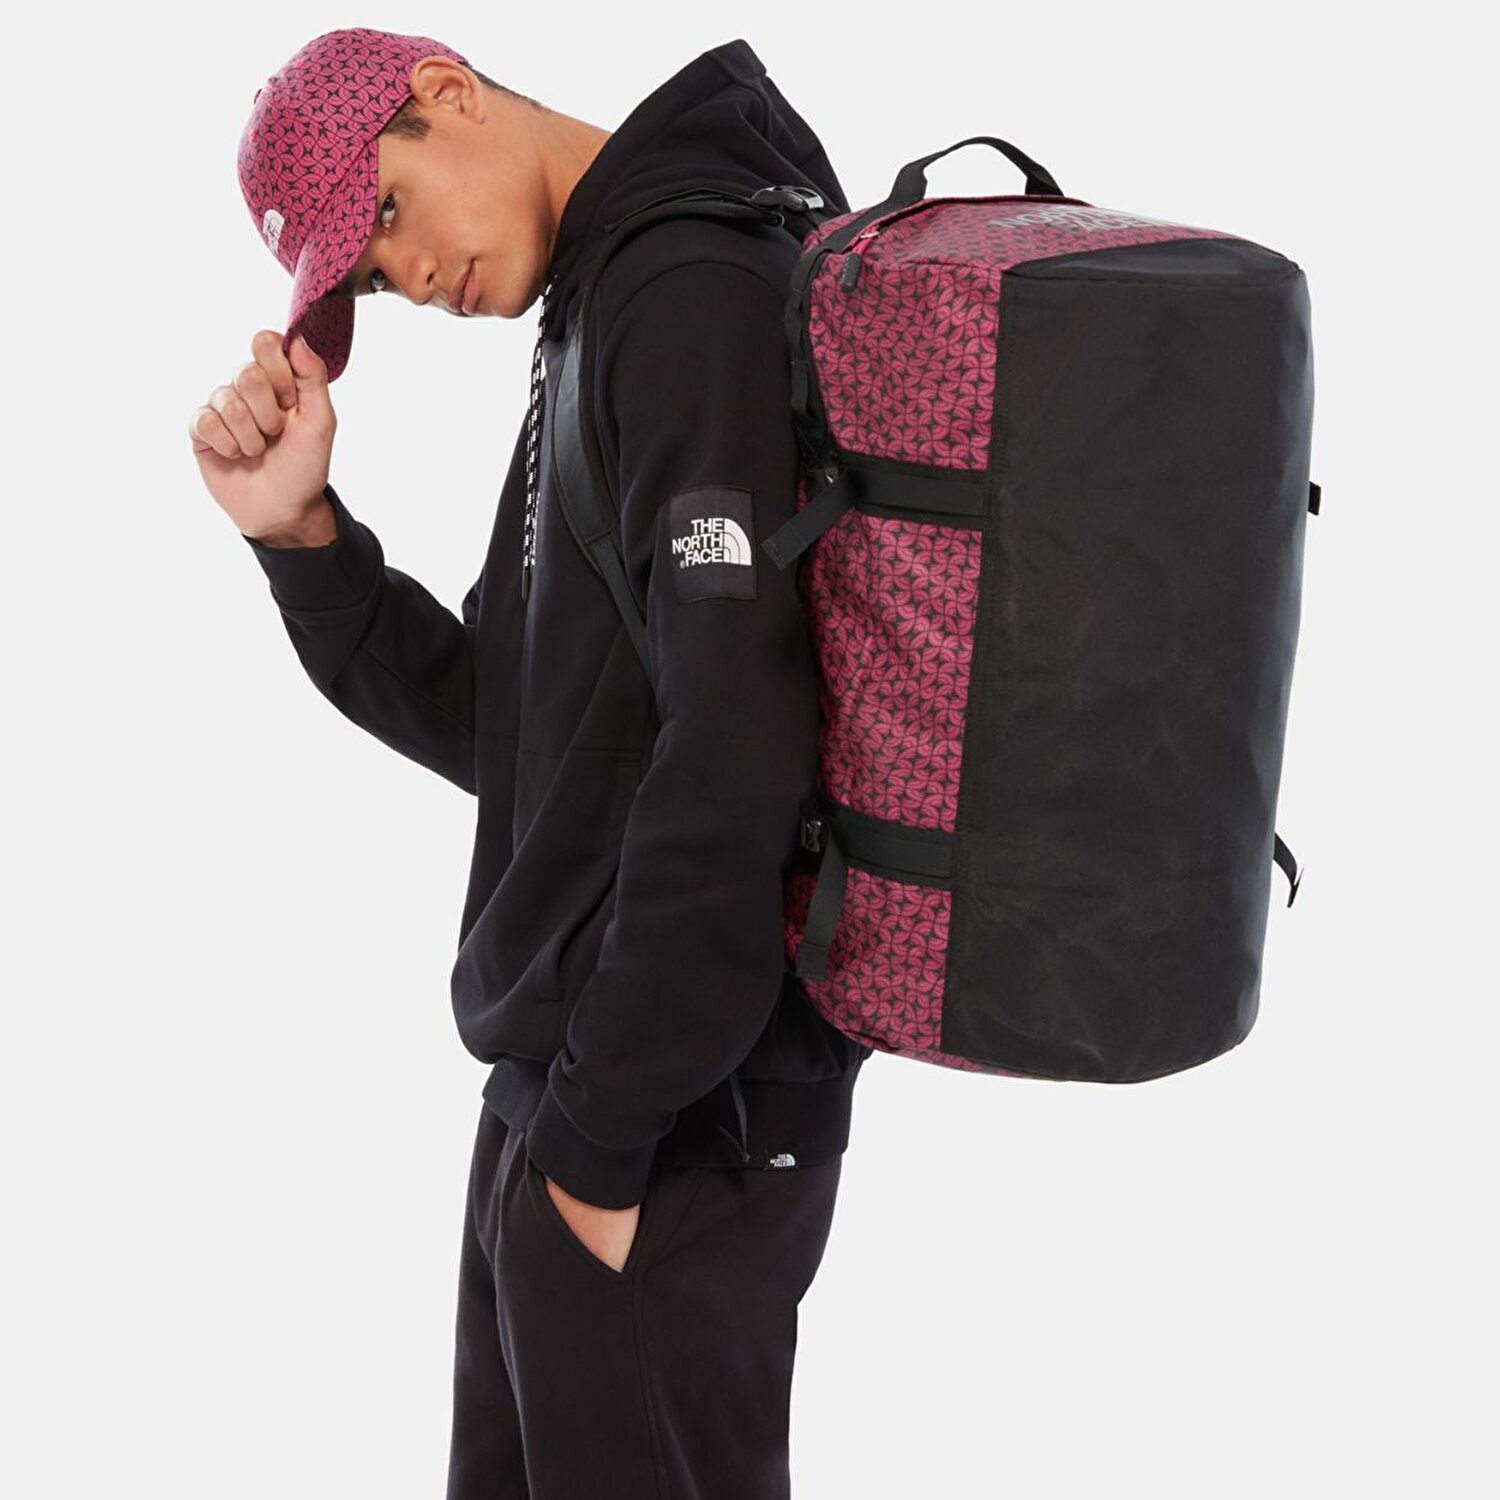 Face camp. Сумка the North face Base Camp Duffel. The North face Base Camp Duffel s. The North face Duffel 50. The North face Duffel Bag s.